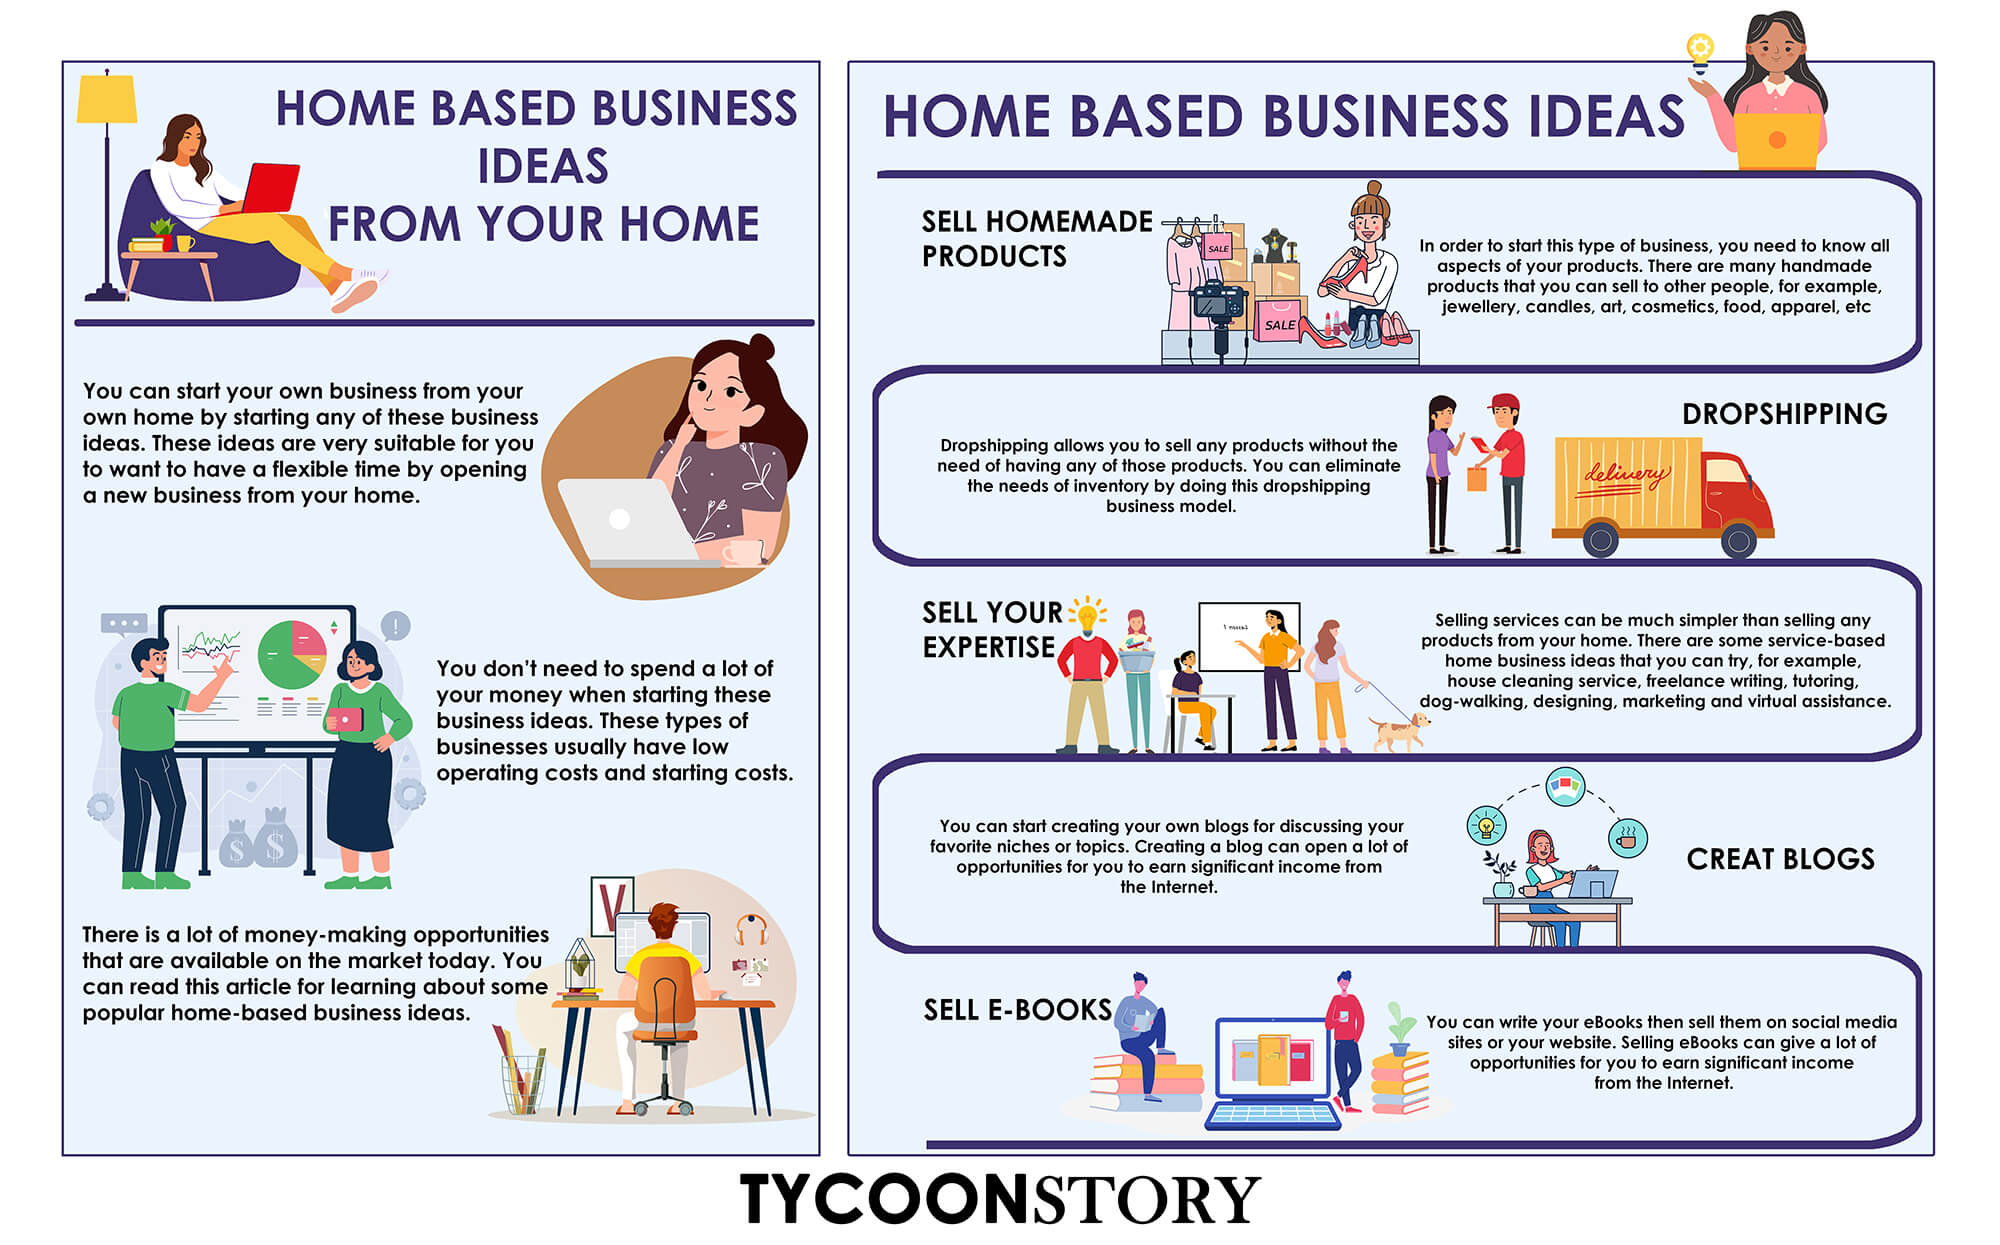 Home based business ideas from your home work from home business ideas